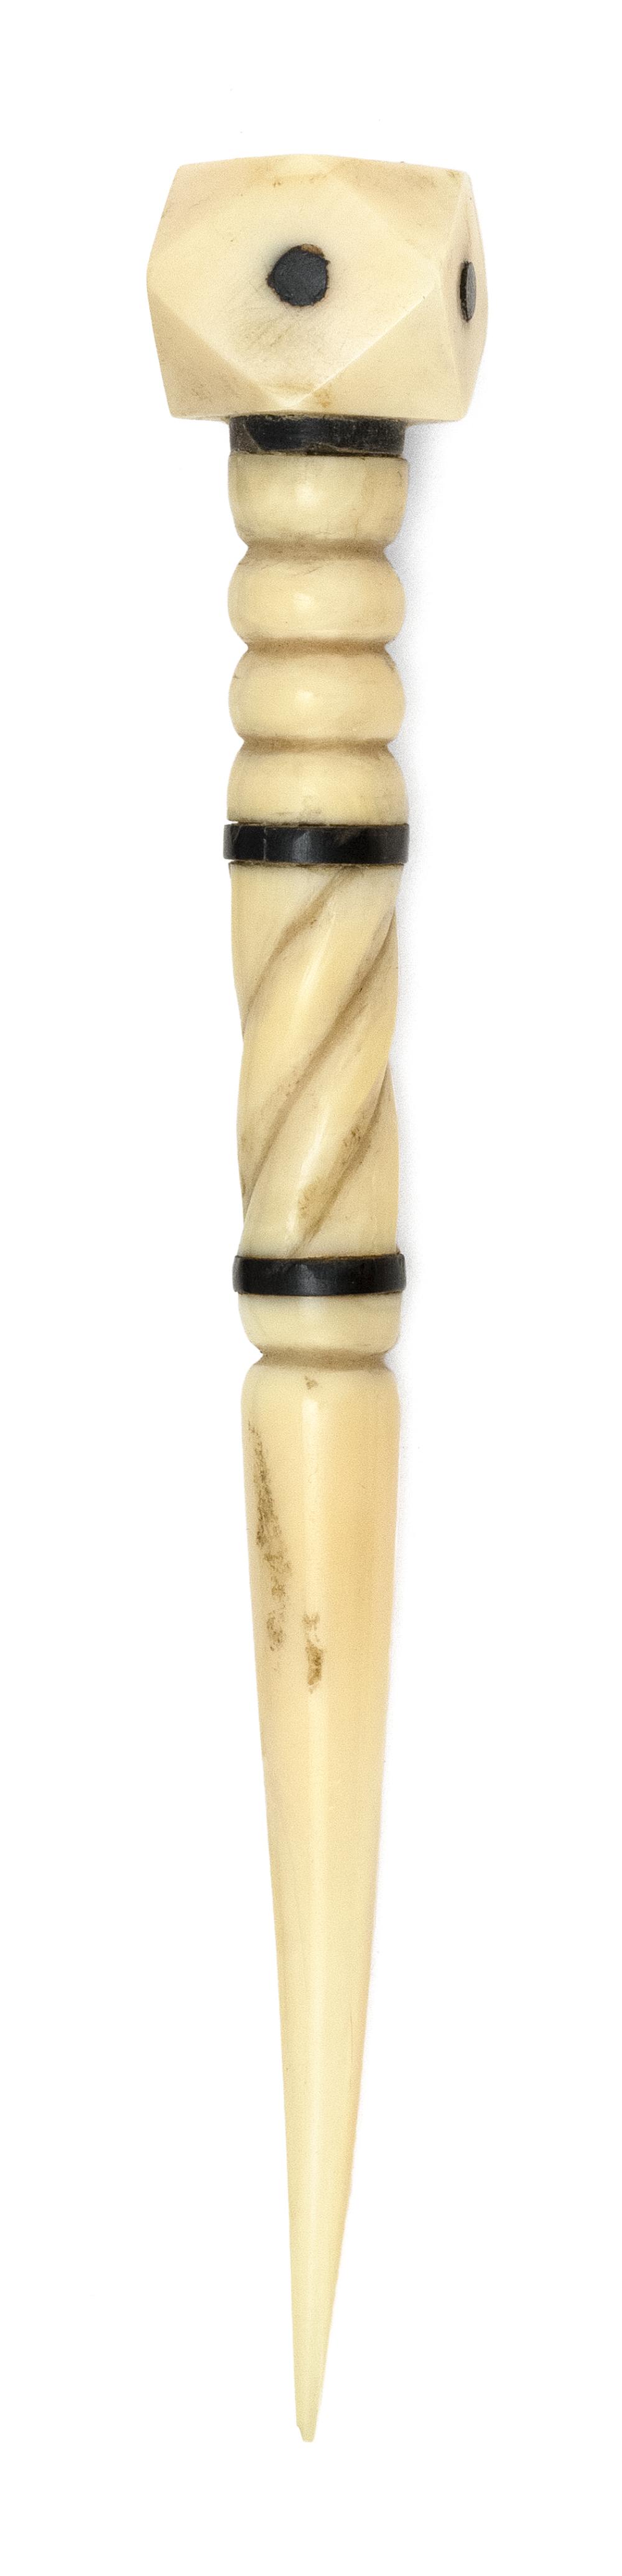 INLAID WHALE IVORY BODKIN MID 19TH 34d7f2